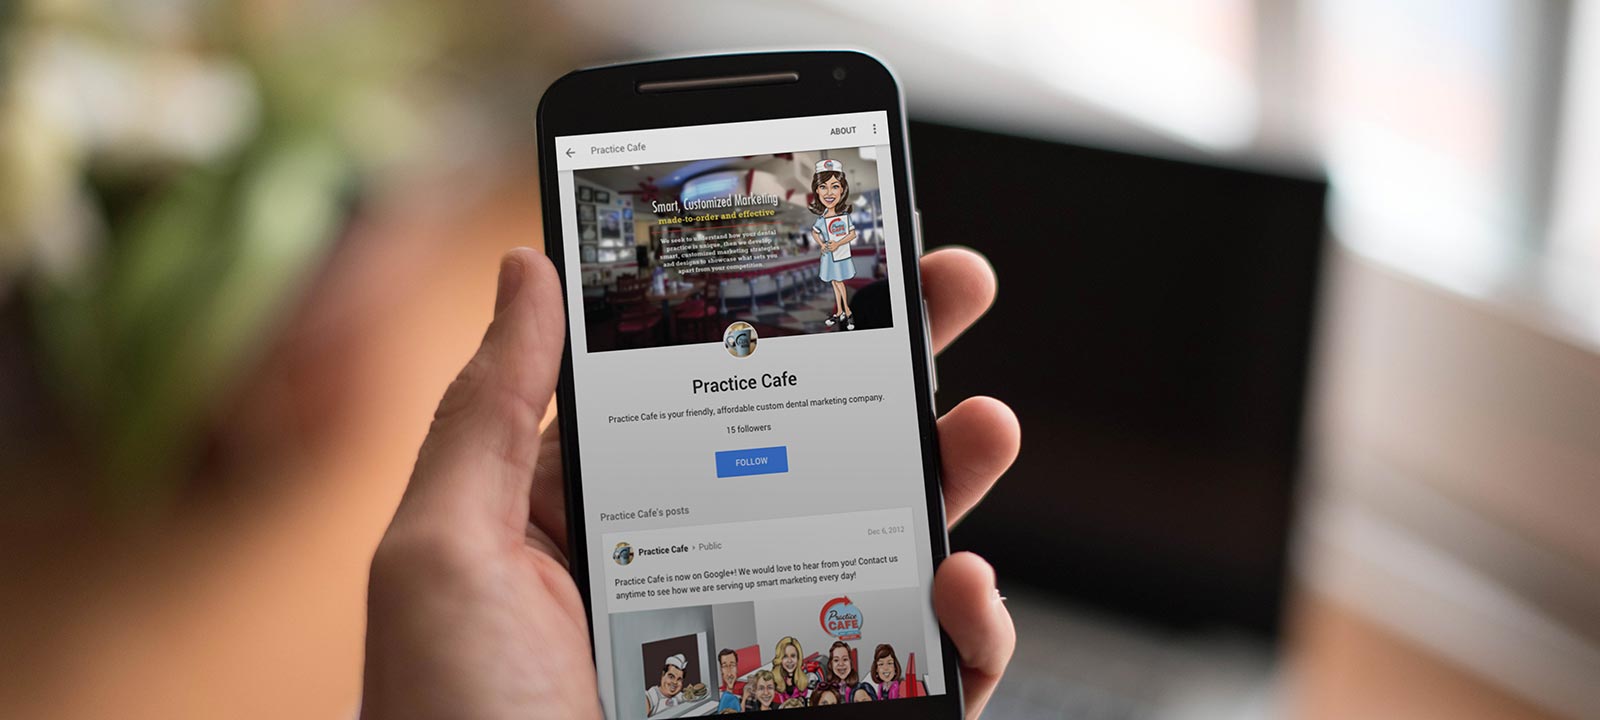 Practice Cafe on Google Plus Mobile